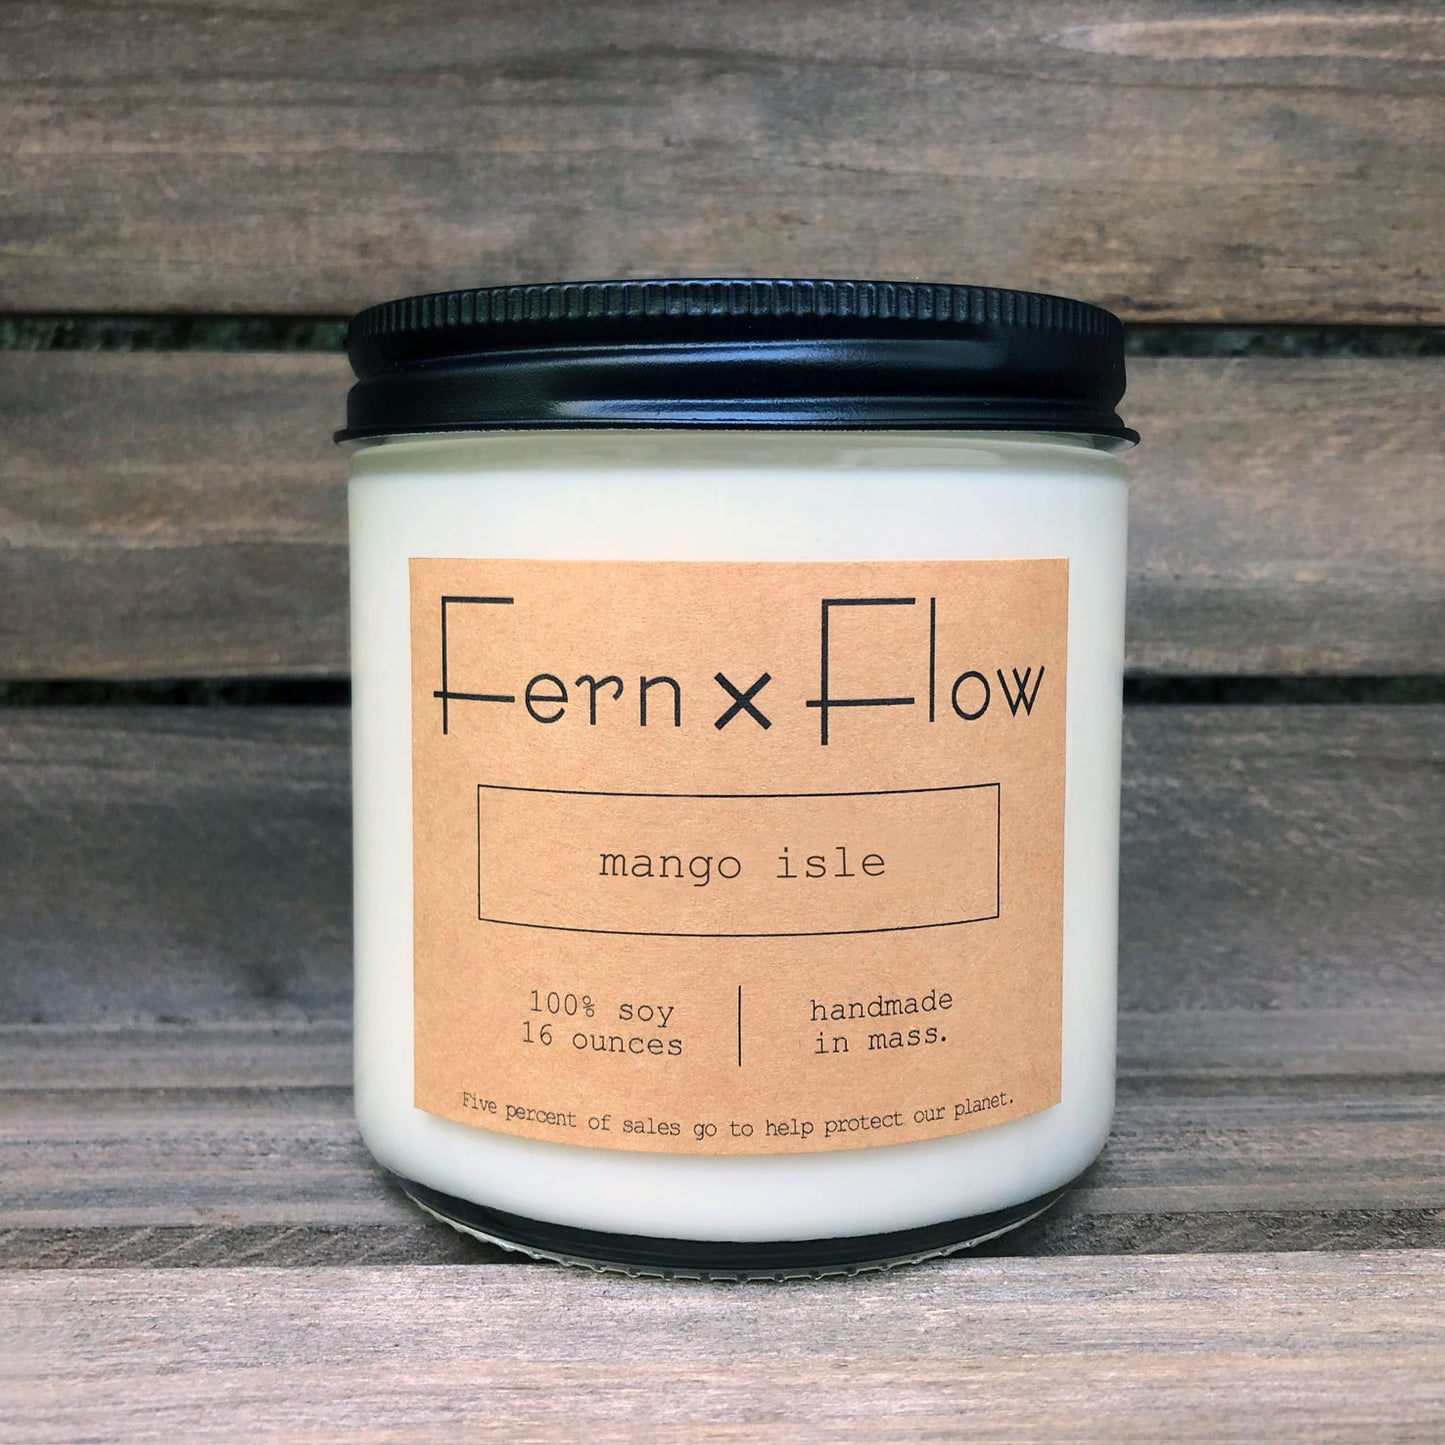 Sixteen-ounce Fern x Flow Mango Isle scented soy candle against a weathered, wooden crate.